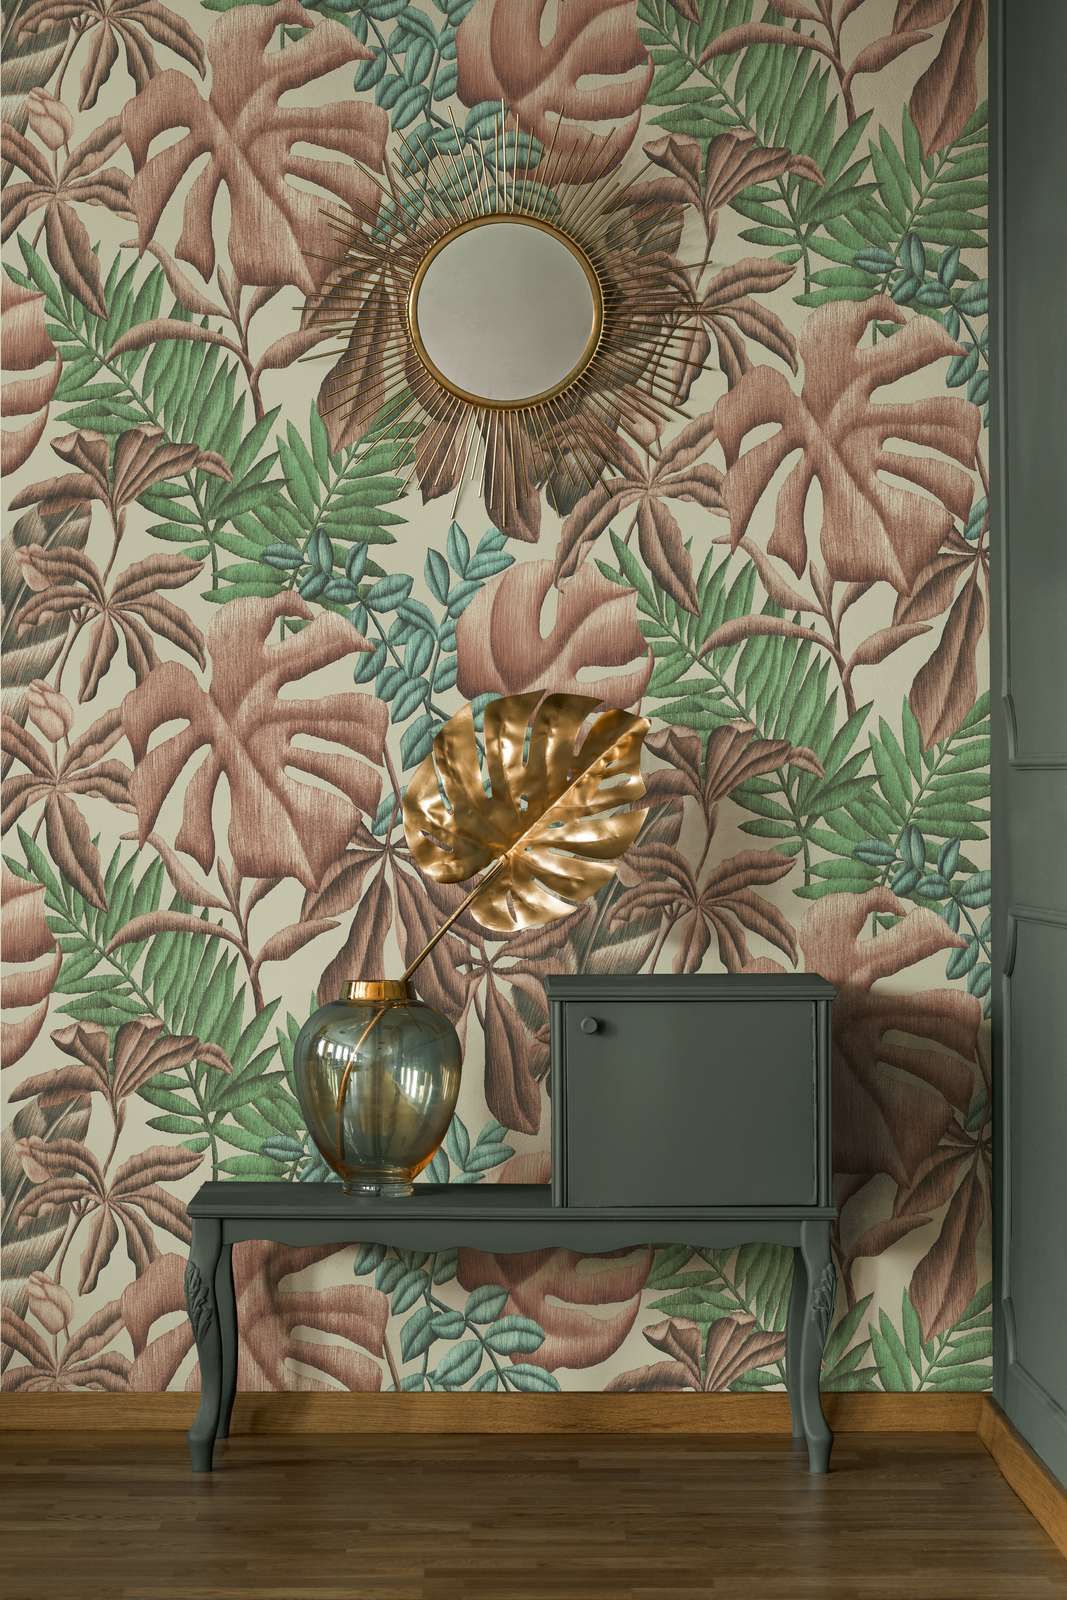             Leaf pattern non-woven wallpaper with banana leaves & fern - pink, green, cream
        